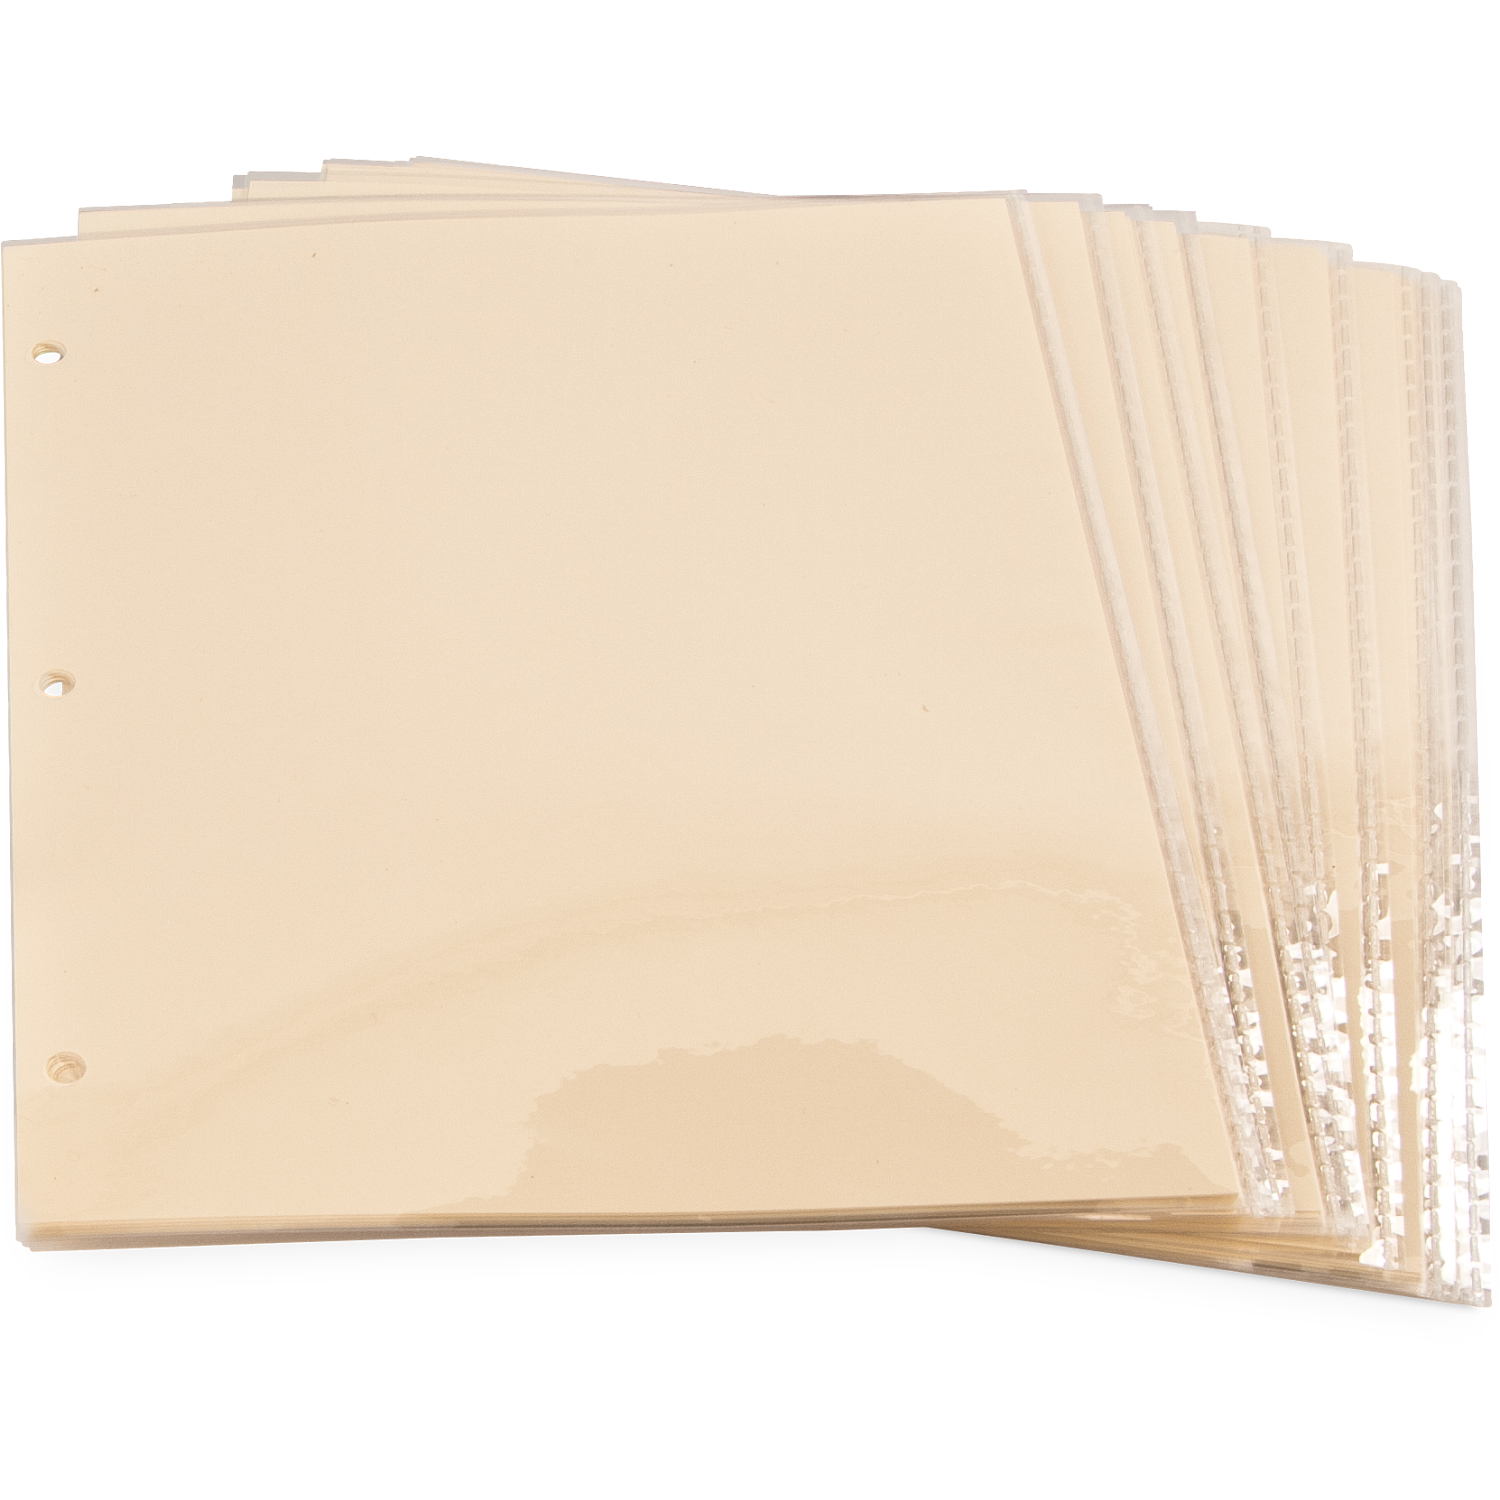 Gaylord Archival® 2 mil Archival Polyester Stereoscopic Card Sleeves  (25-Pack), Envelopes, Sleeves & Protectors, Media Preservation, Preservation